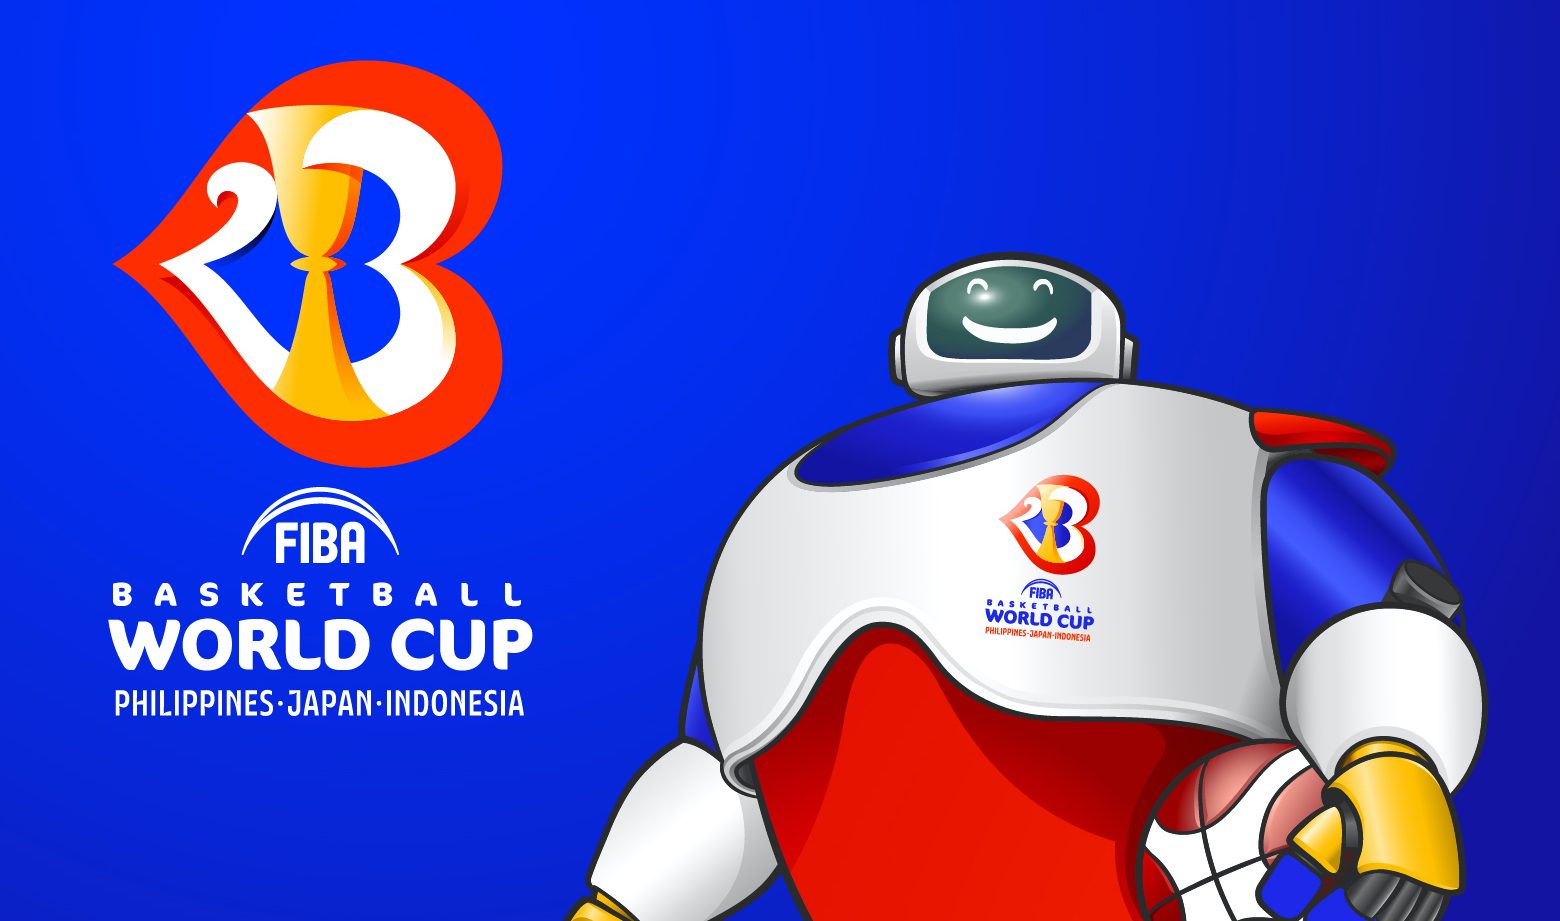 Fans get chance to name FIBA World Cup mascot